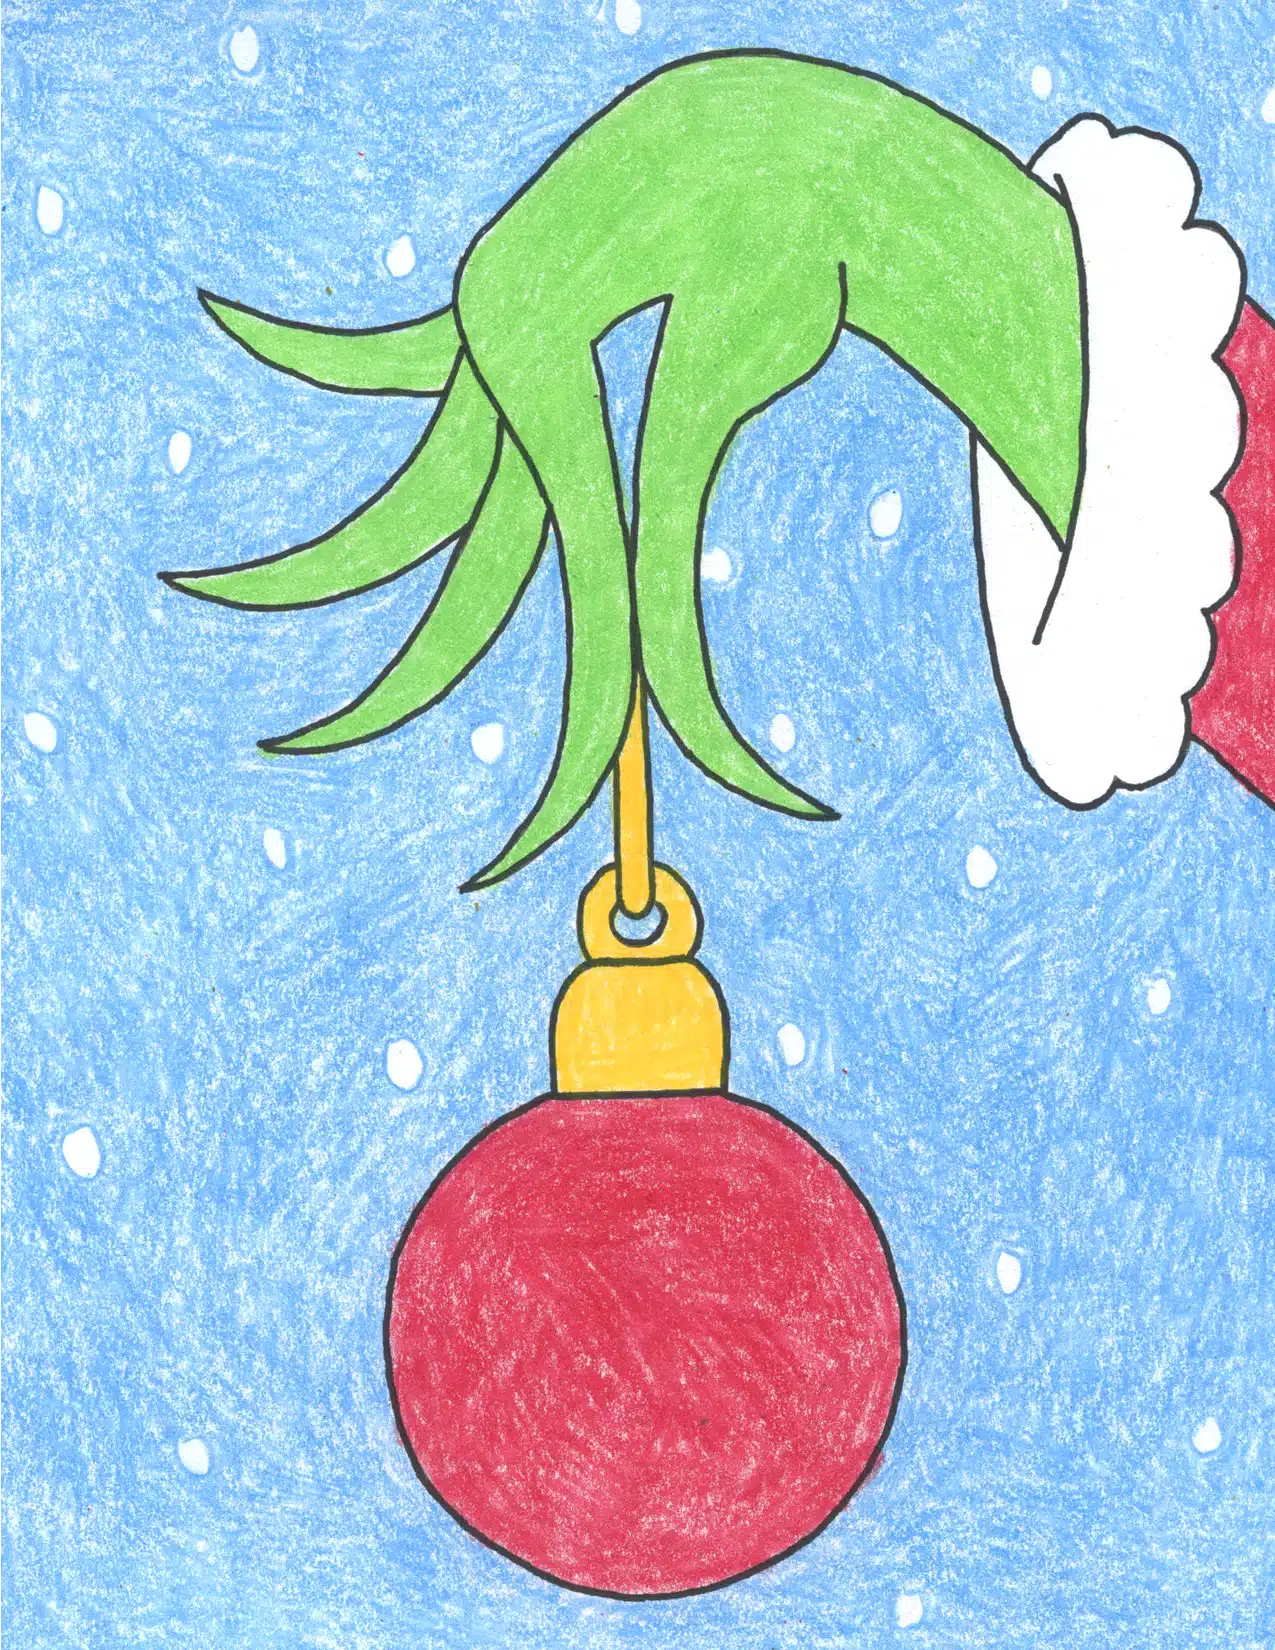 Easy Grinch Hand Drawing Tutorial and Grinch Hand Coloring Page